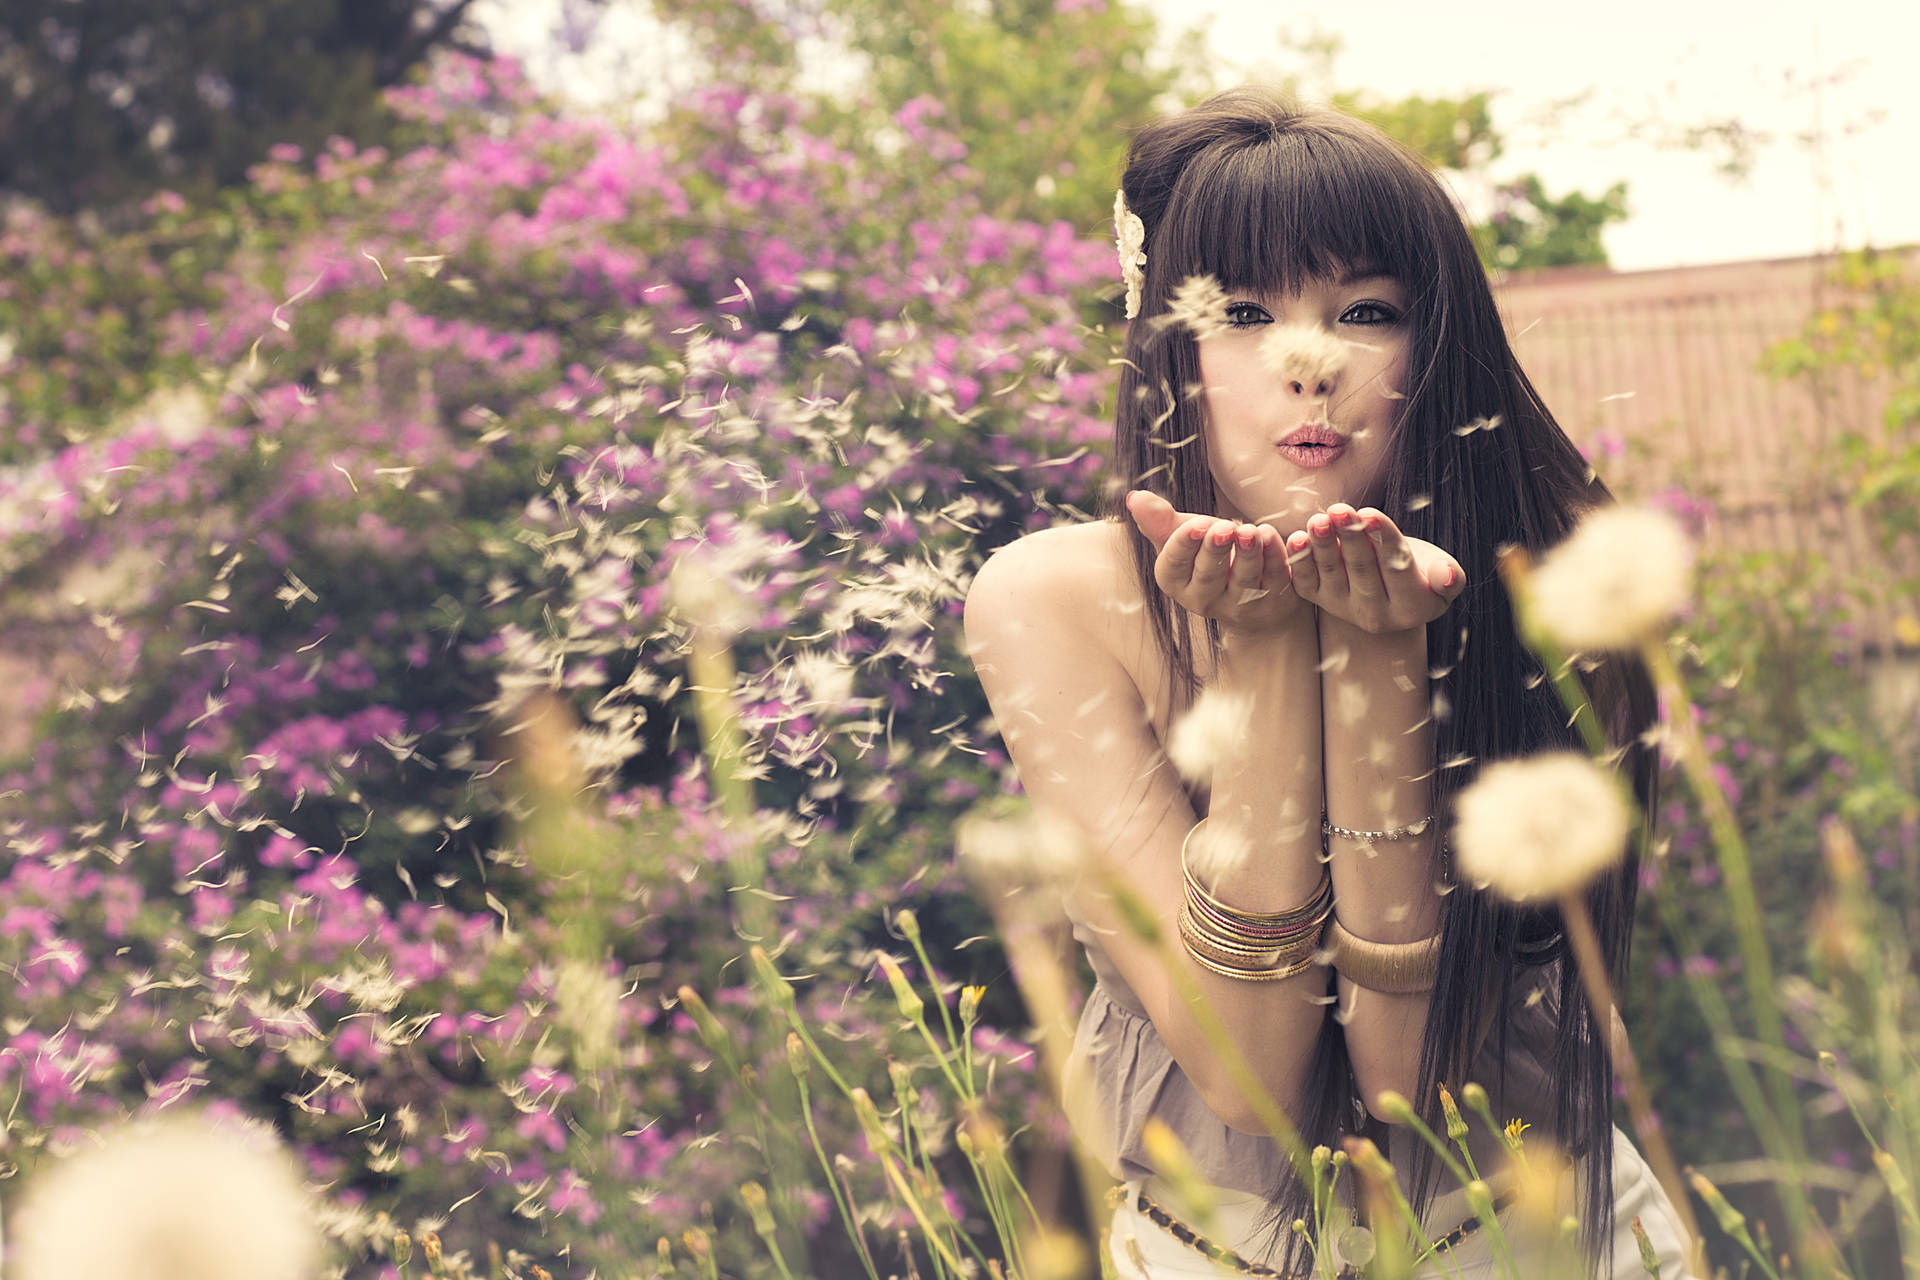 Chinese Woman And Dandelions Wallpaper